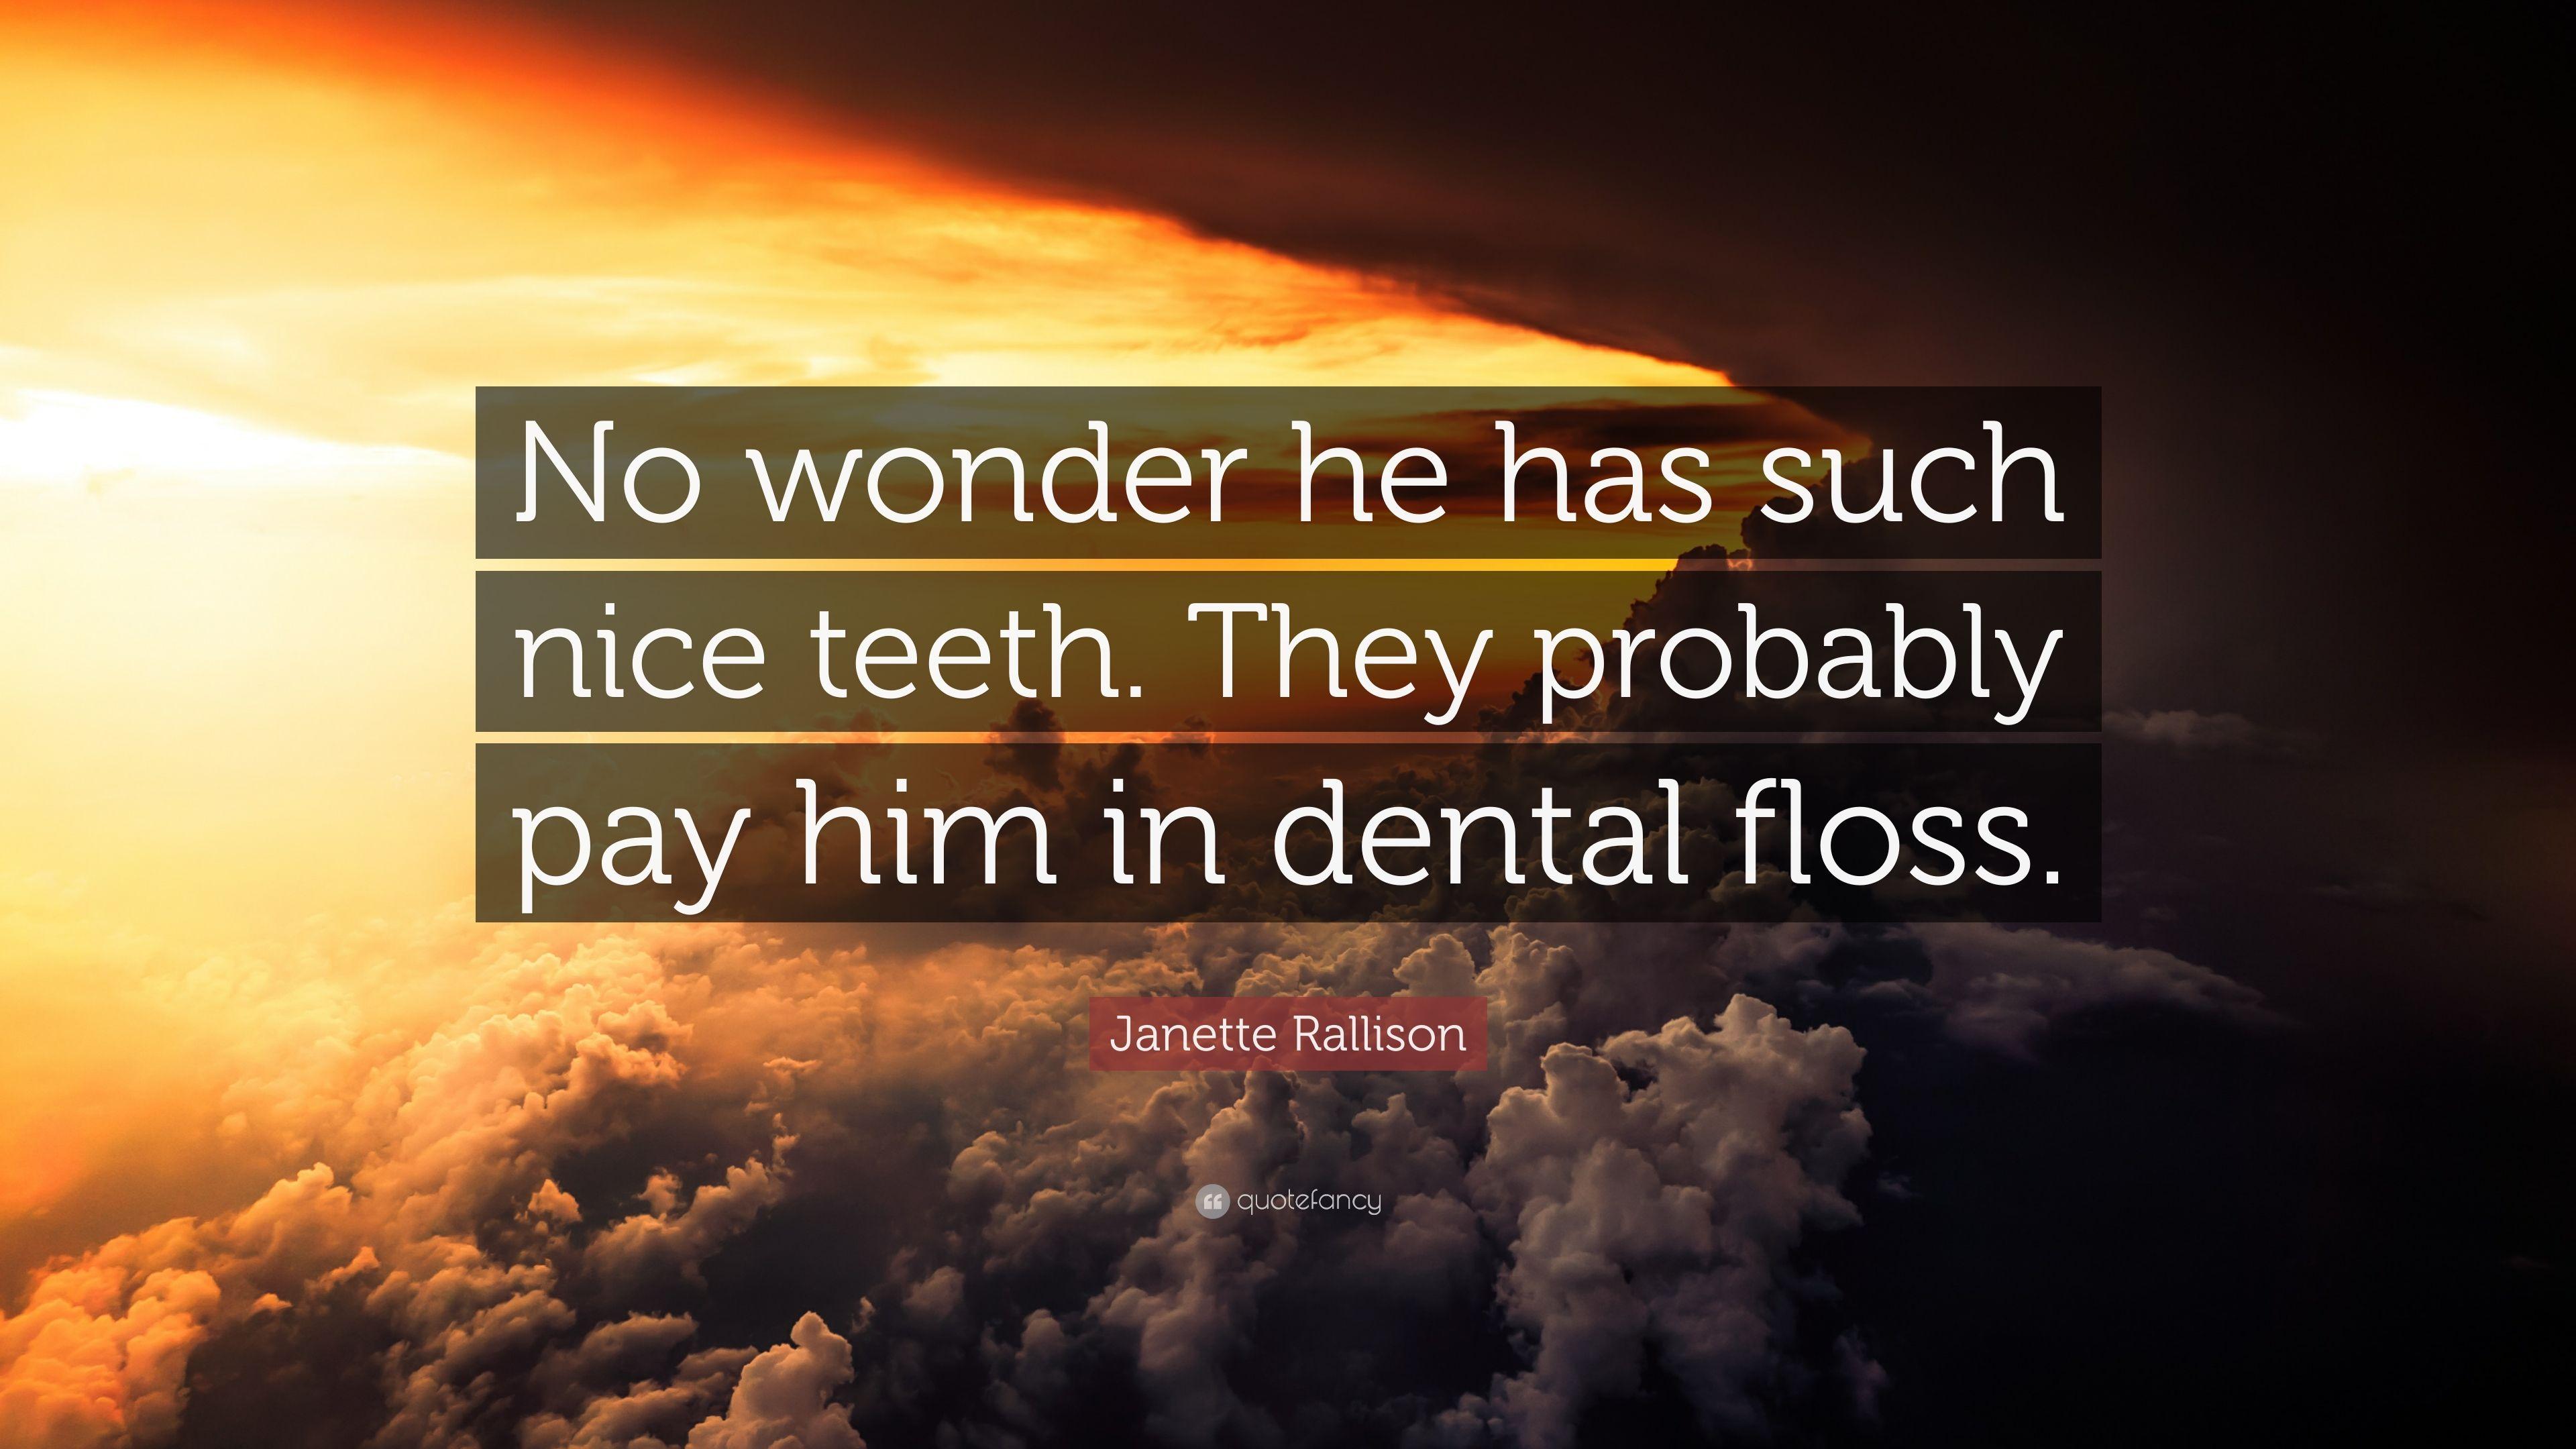 Janette Rallison Quote: “No wonder he has such nice teeth. They